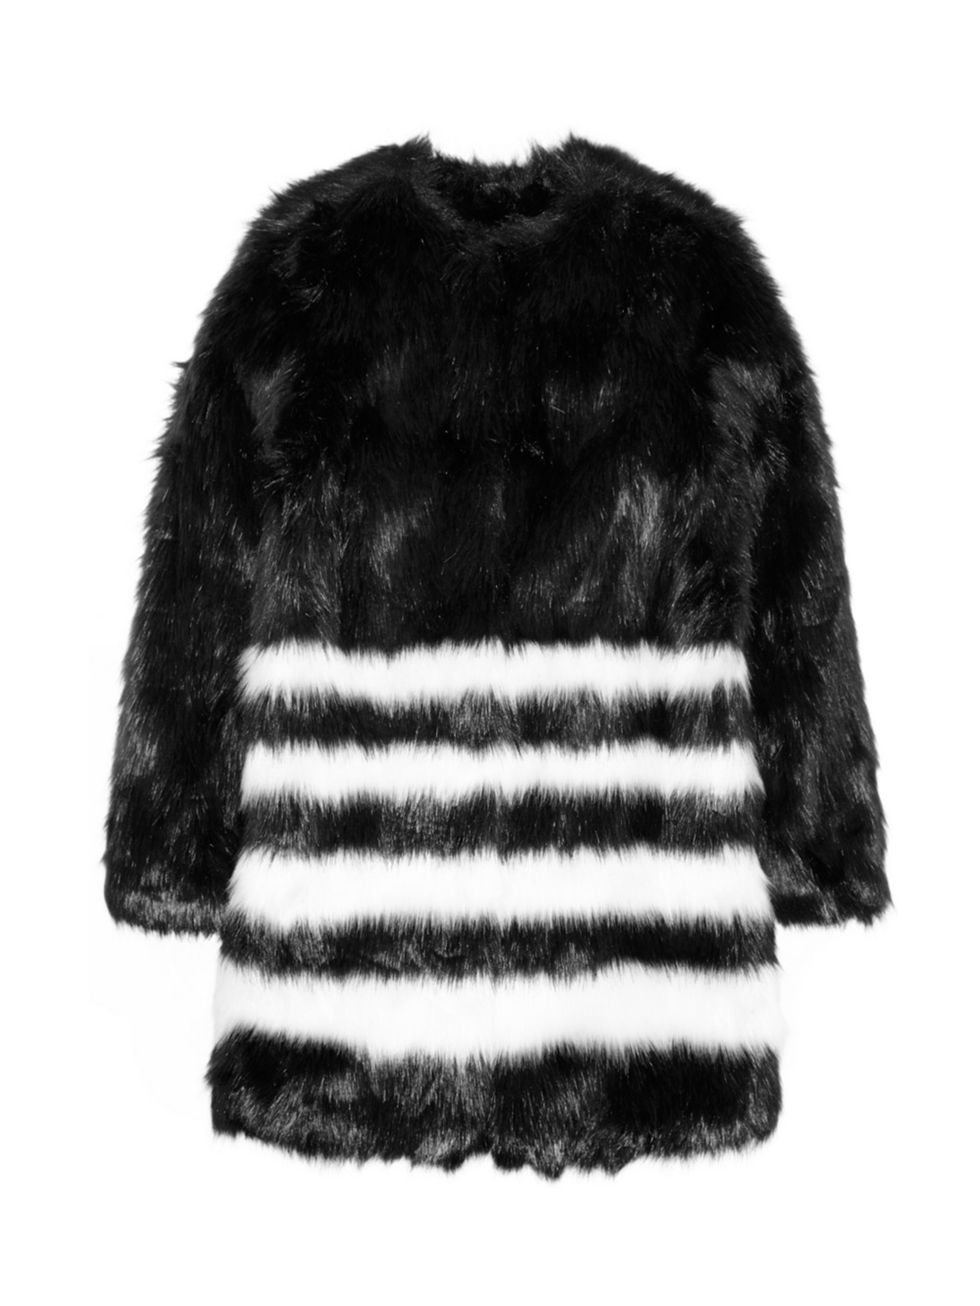 Sleeve, Textile, Style, Woolen, Sweater, Fur, Wool, Natural material, Fur clothing, Animal product, 